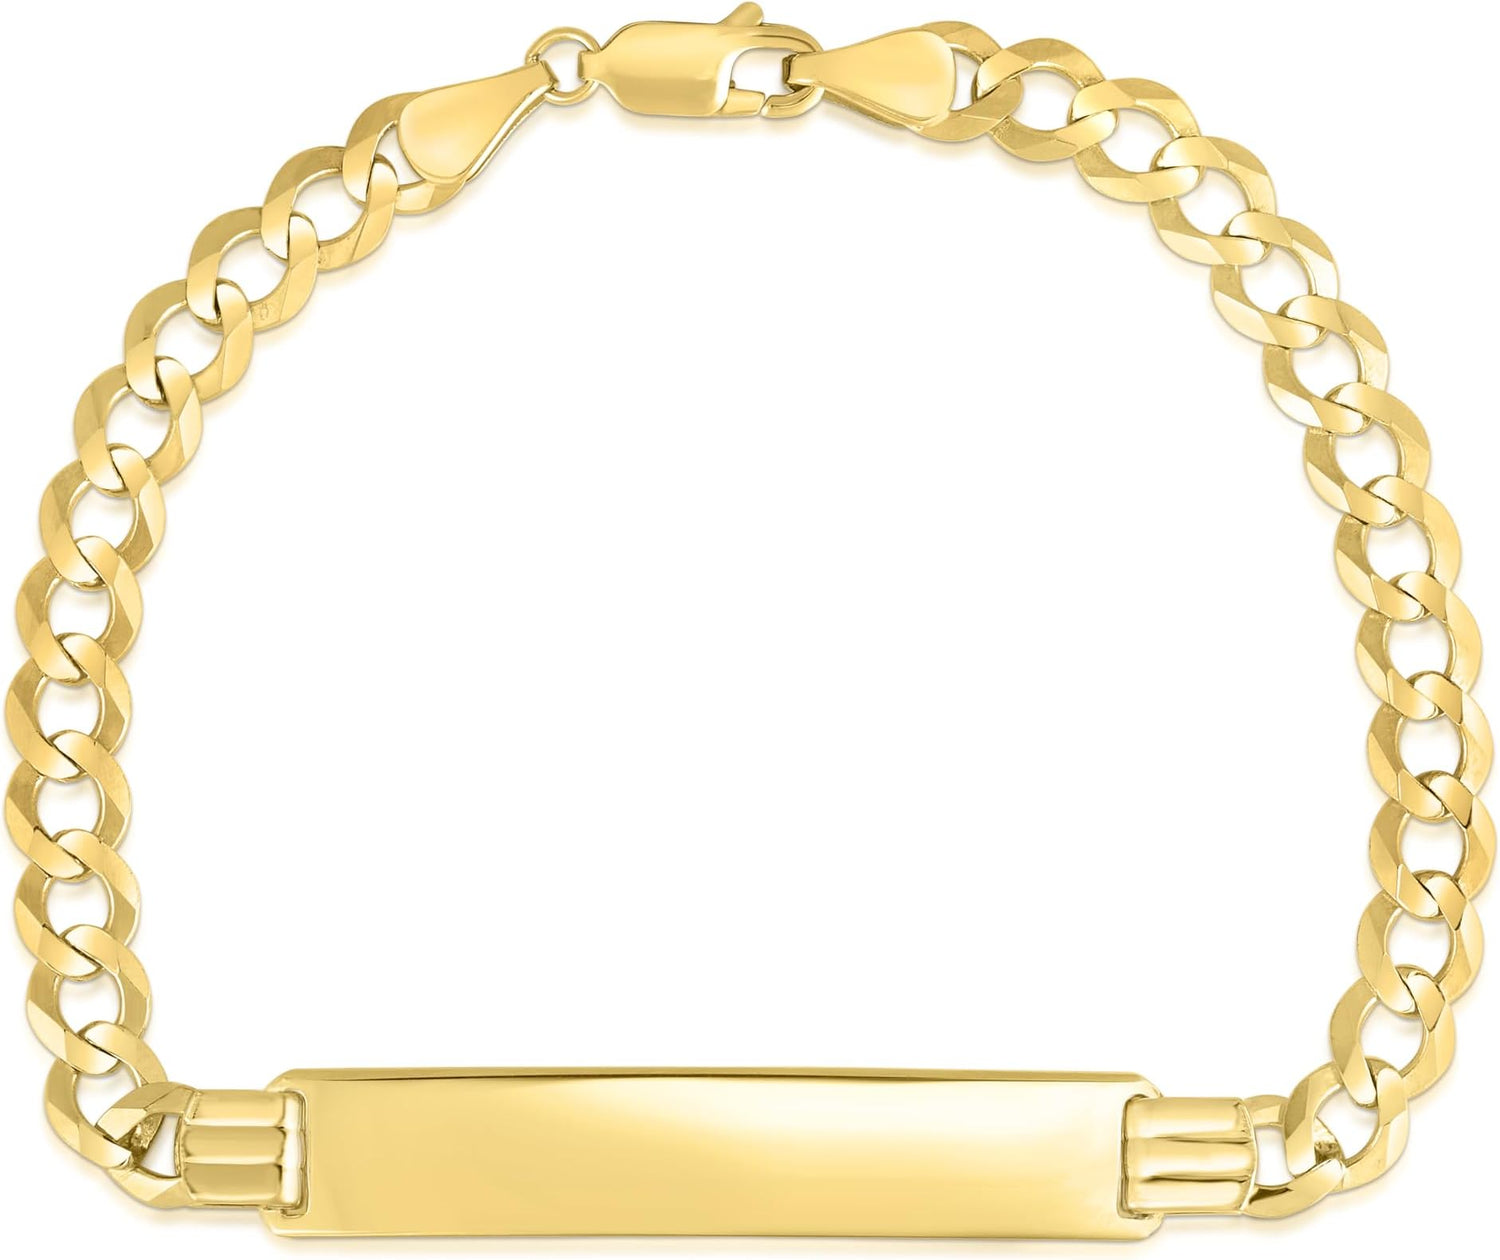 10k Yellow Gold 6mm Solid Curb Personalized Engraved Name Bar Custom ID Link Bracelet